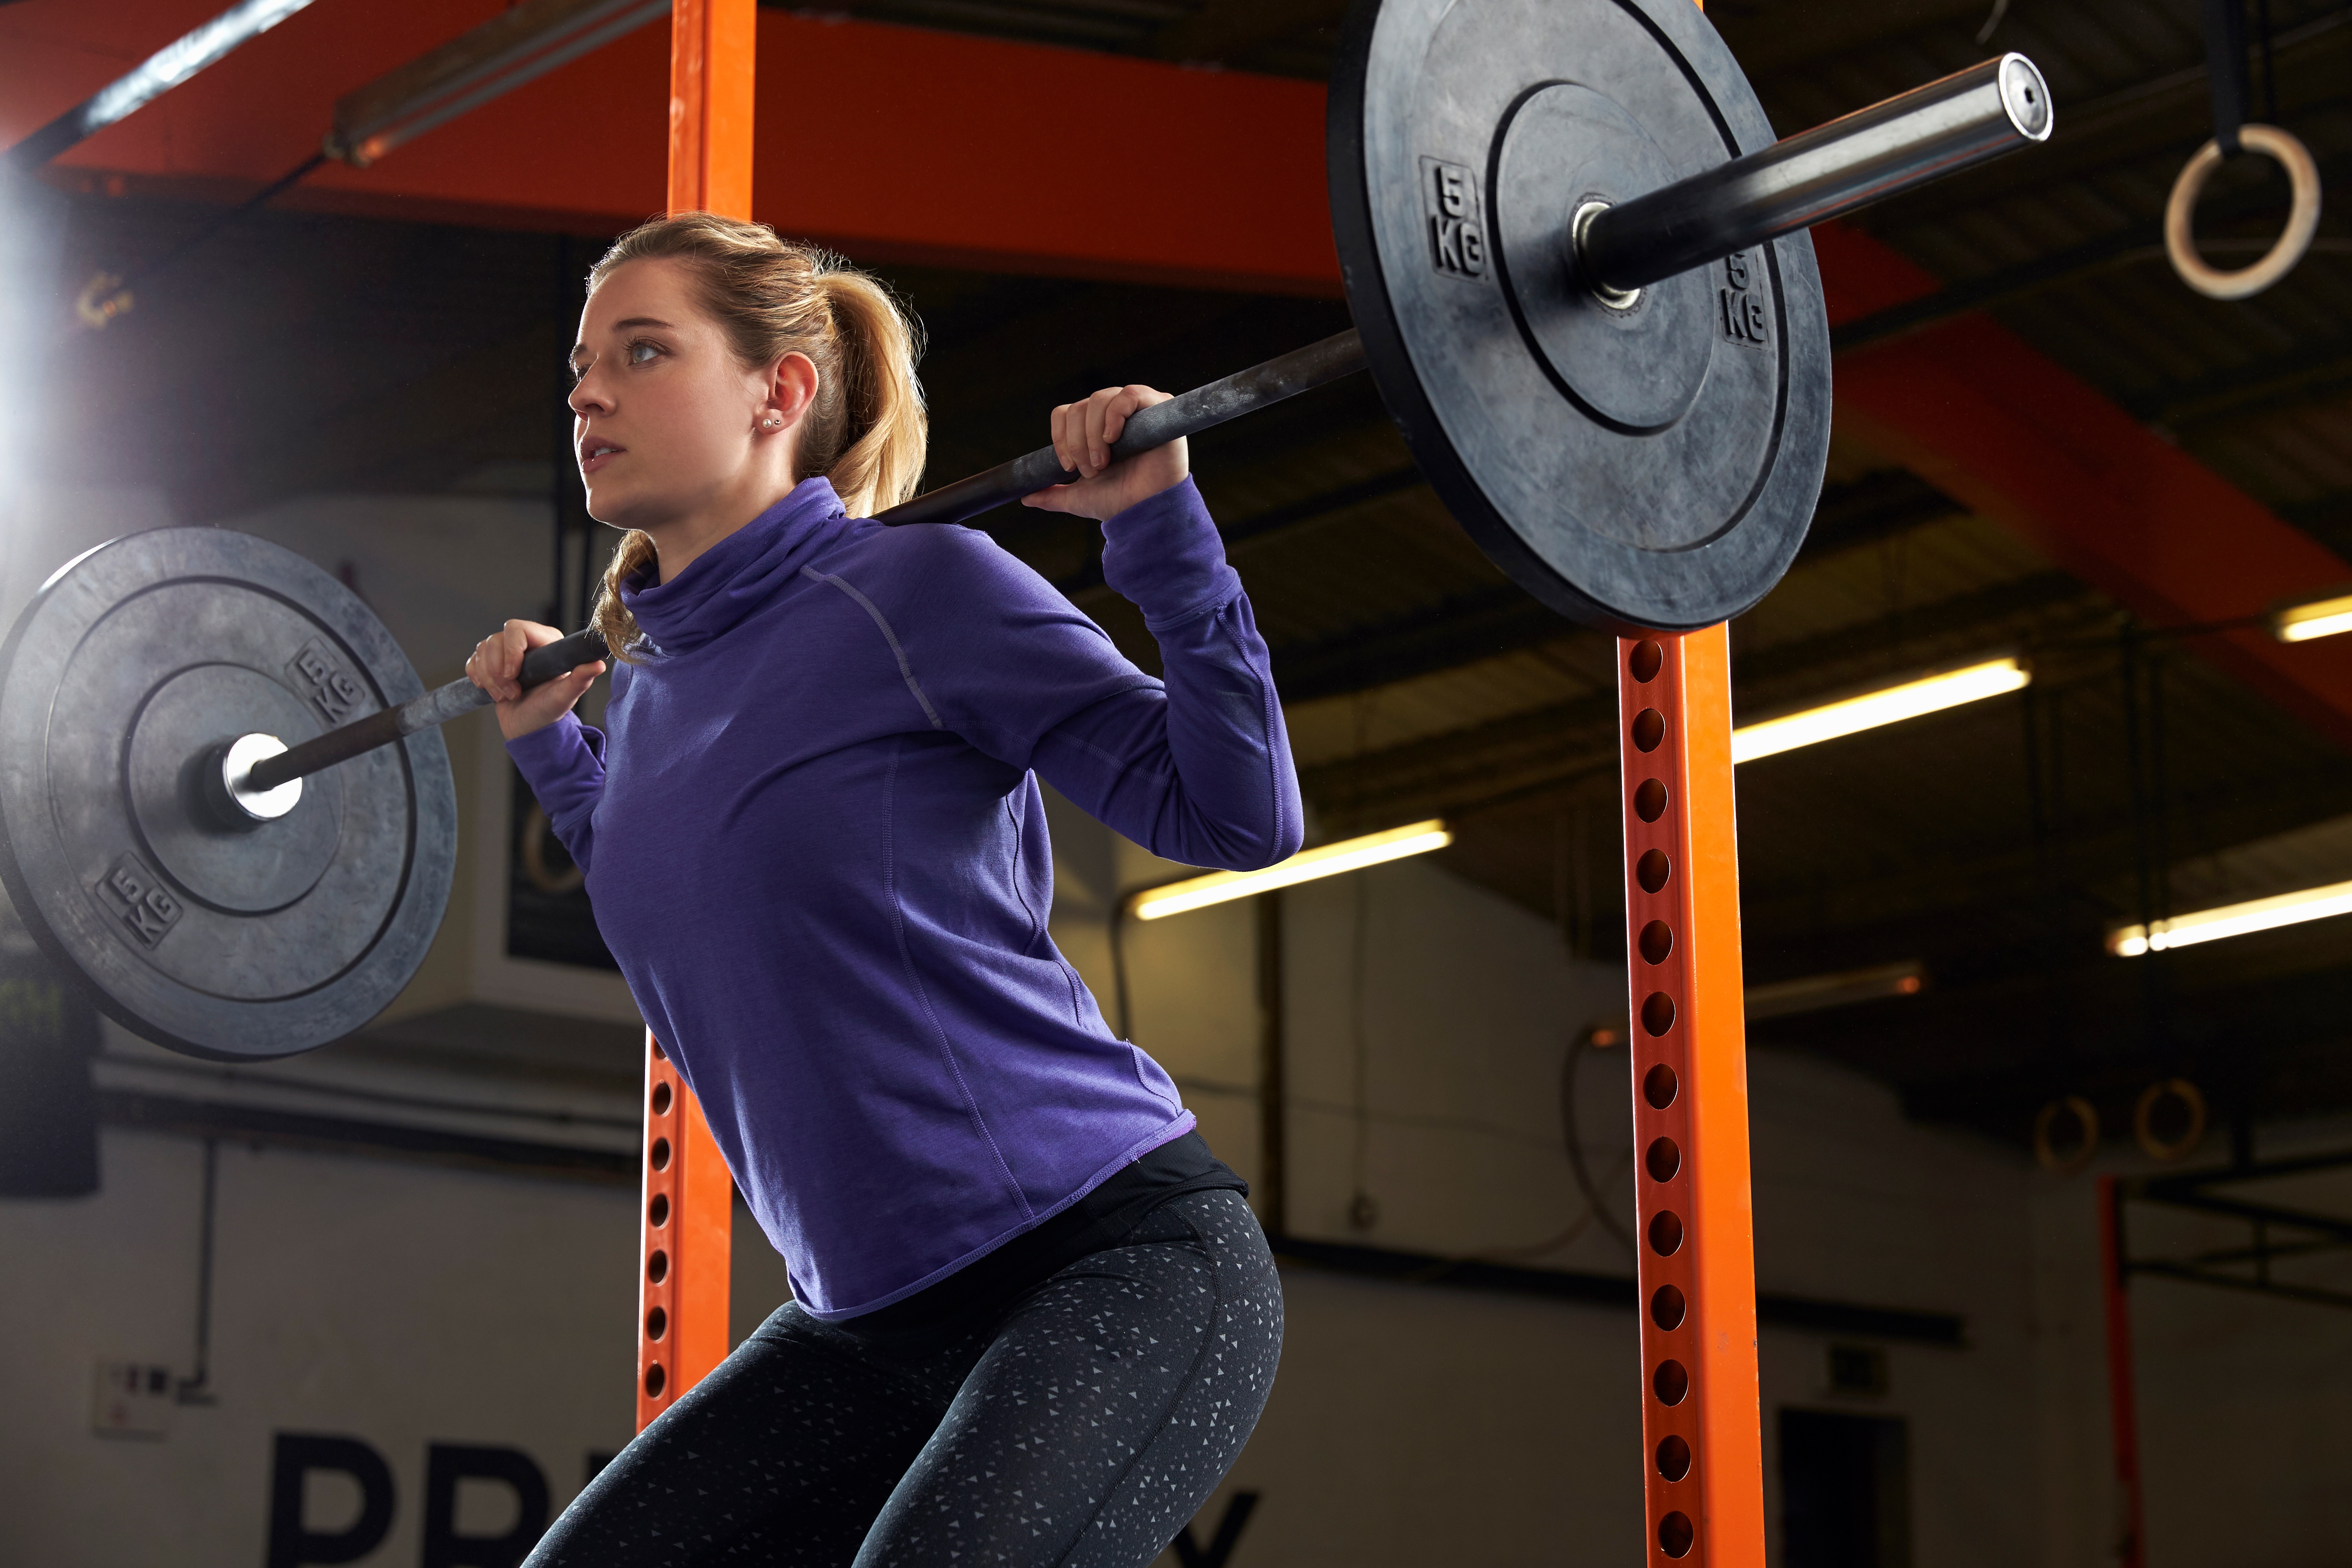 Woman exercising with compound strength movements